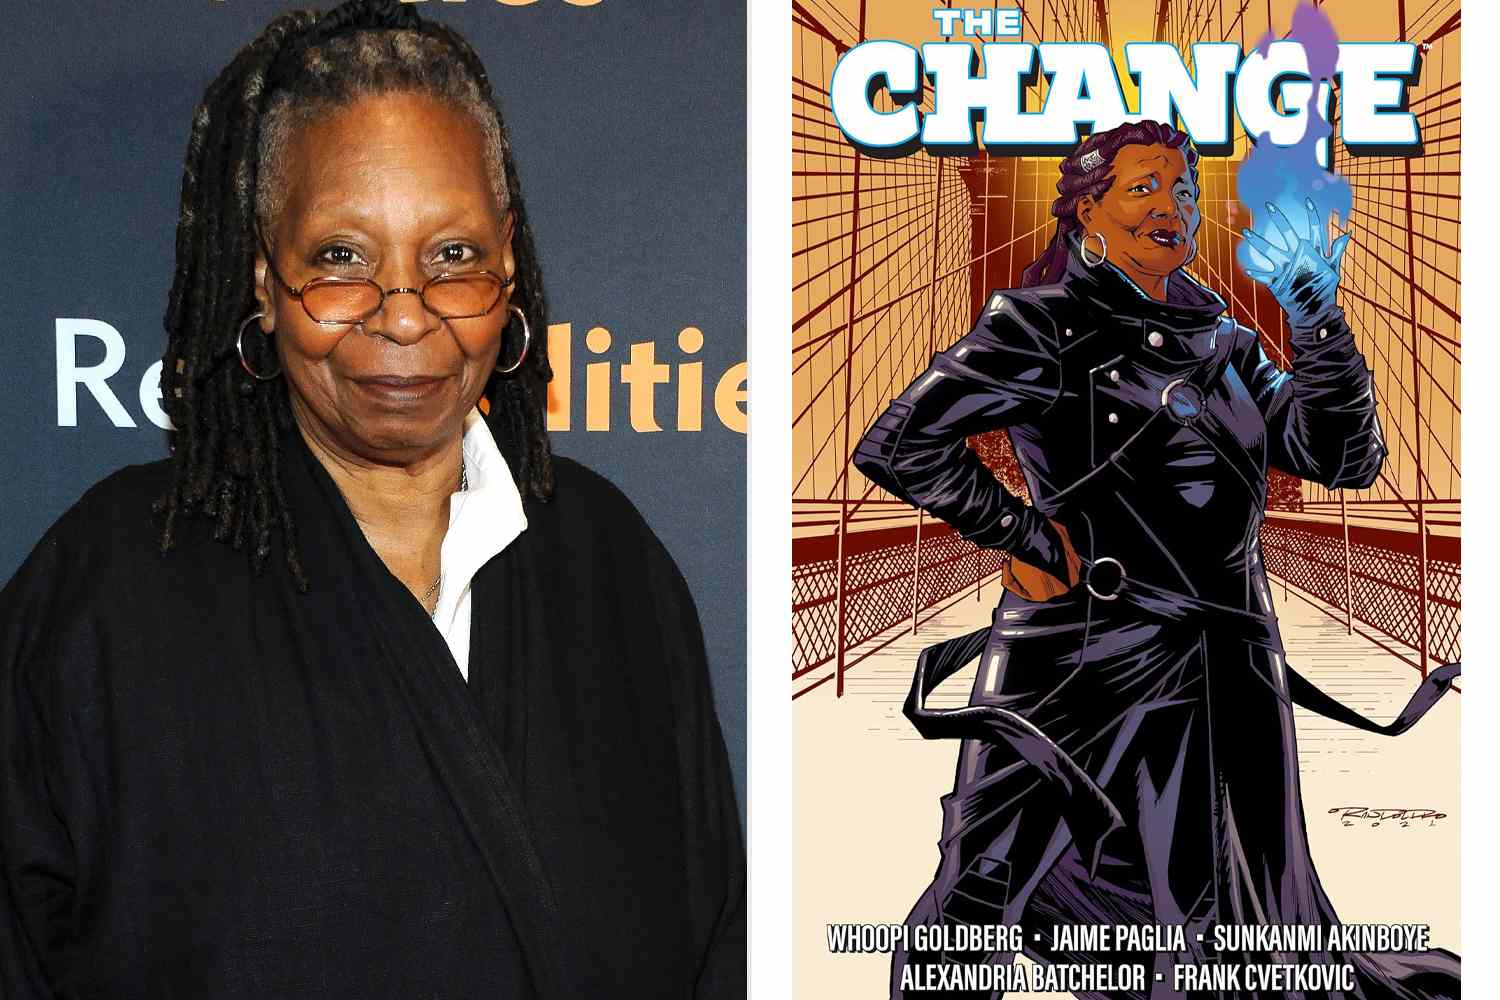 Whoopi Goldberg Releases Comic Book She Wrote ‘25 Years Ago’ About Hero Who 'Embraces' Powers of Menopause